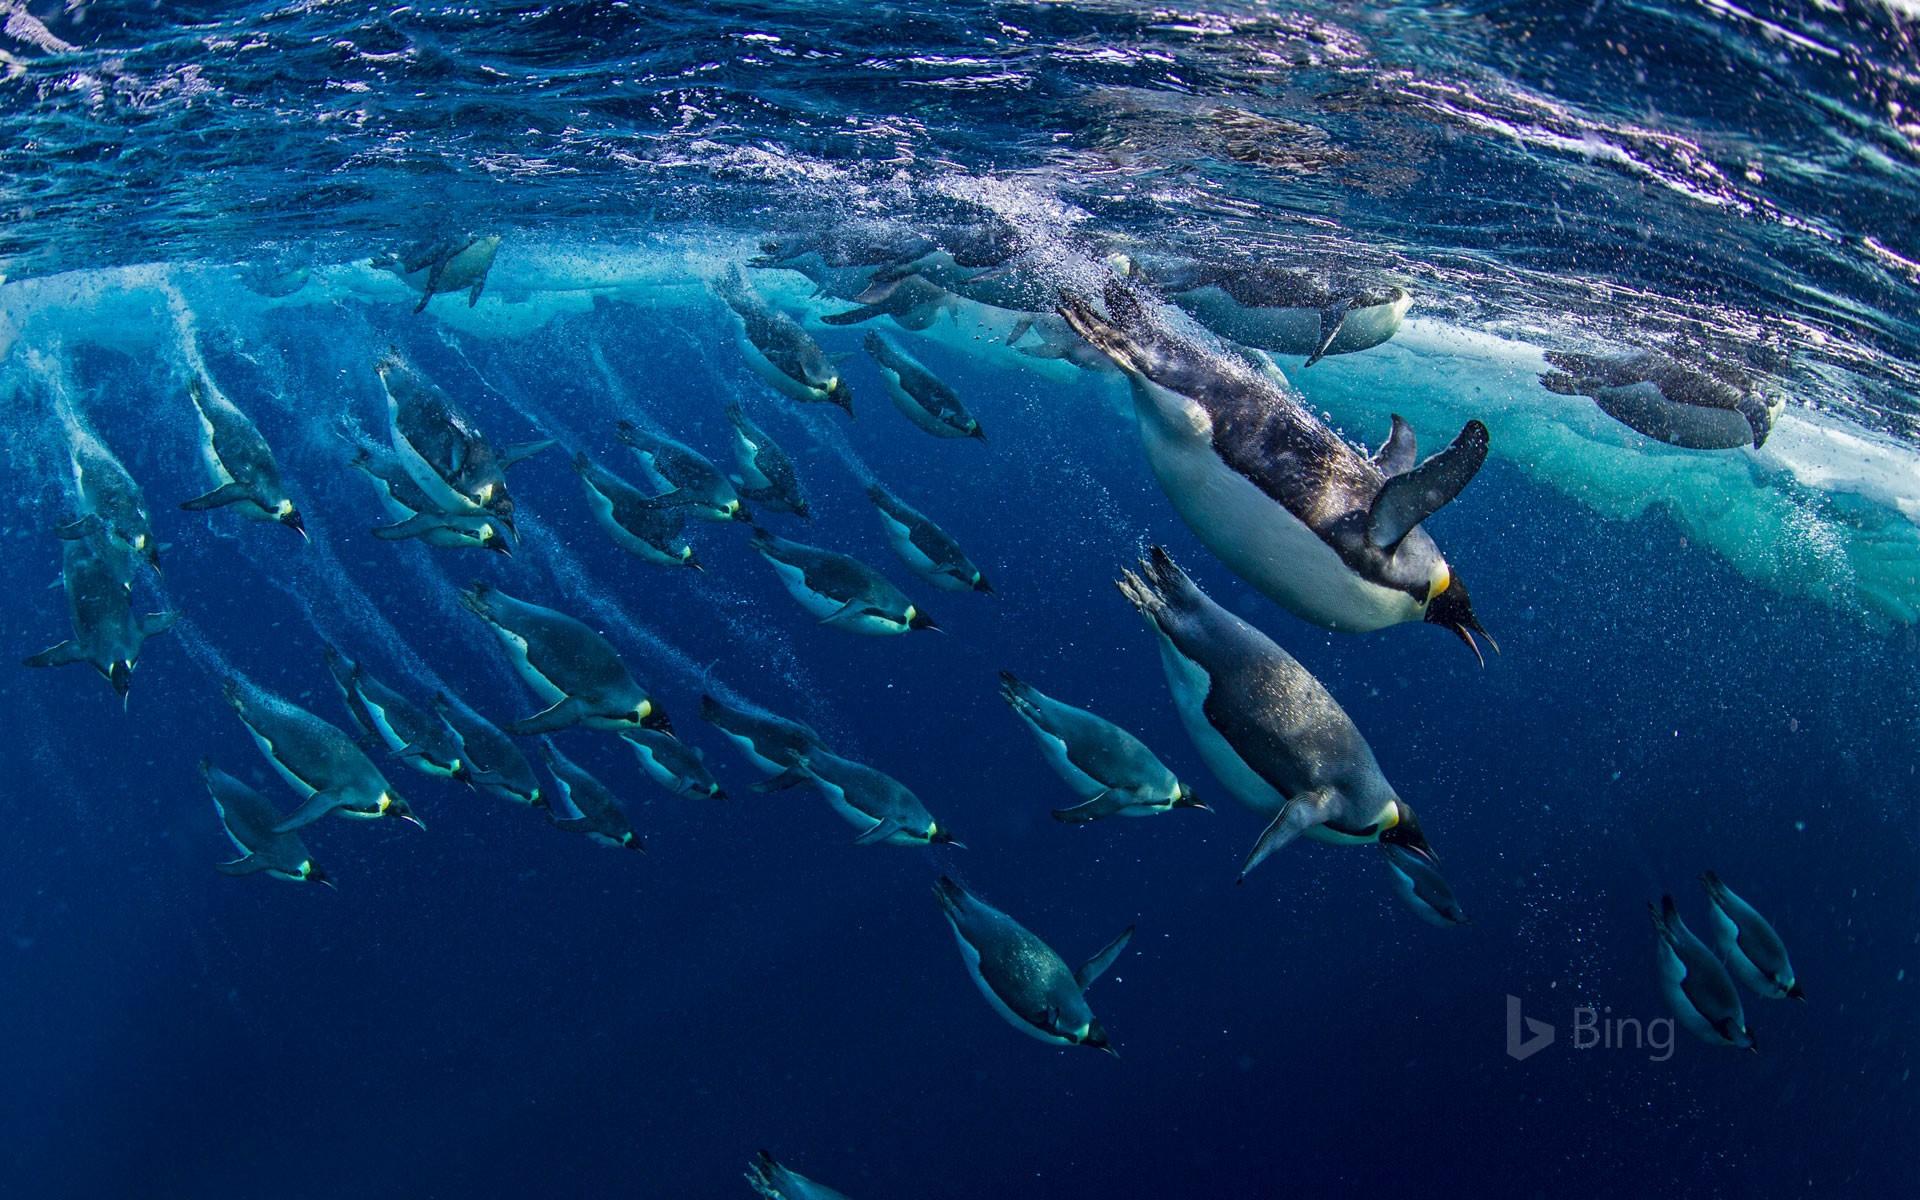 Bing Has A Penguin Themed Cool Wallpaper That You Can